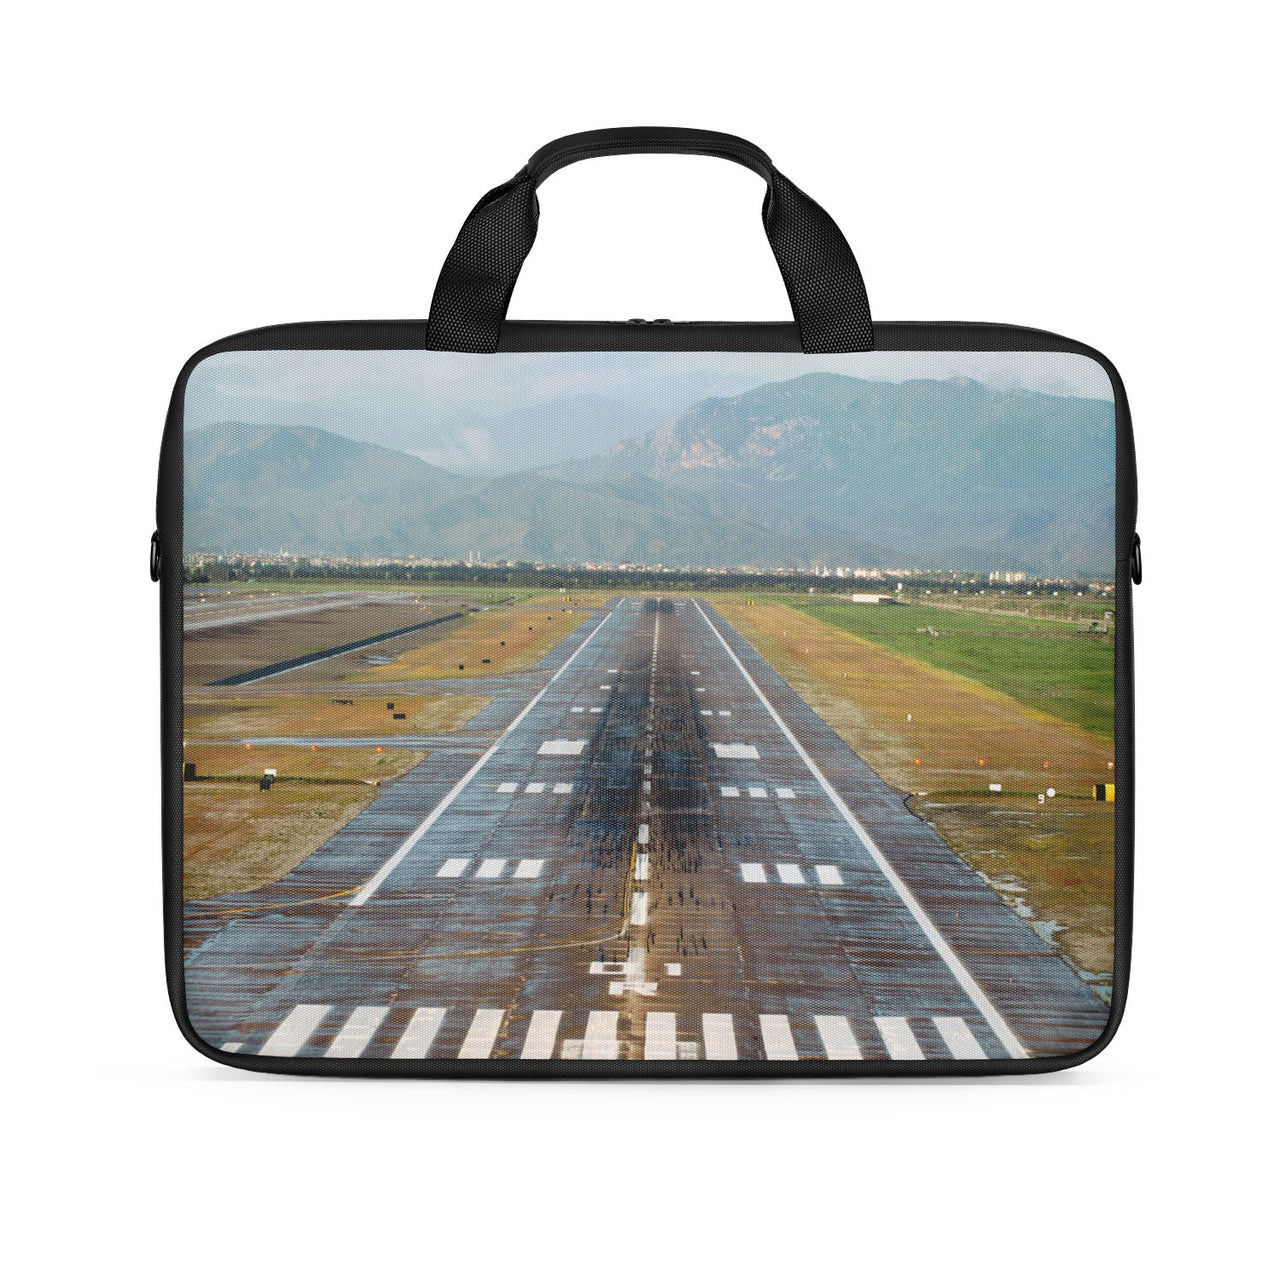 Amazing Mountain View & Runway Designed Laptop & Tablet Bags